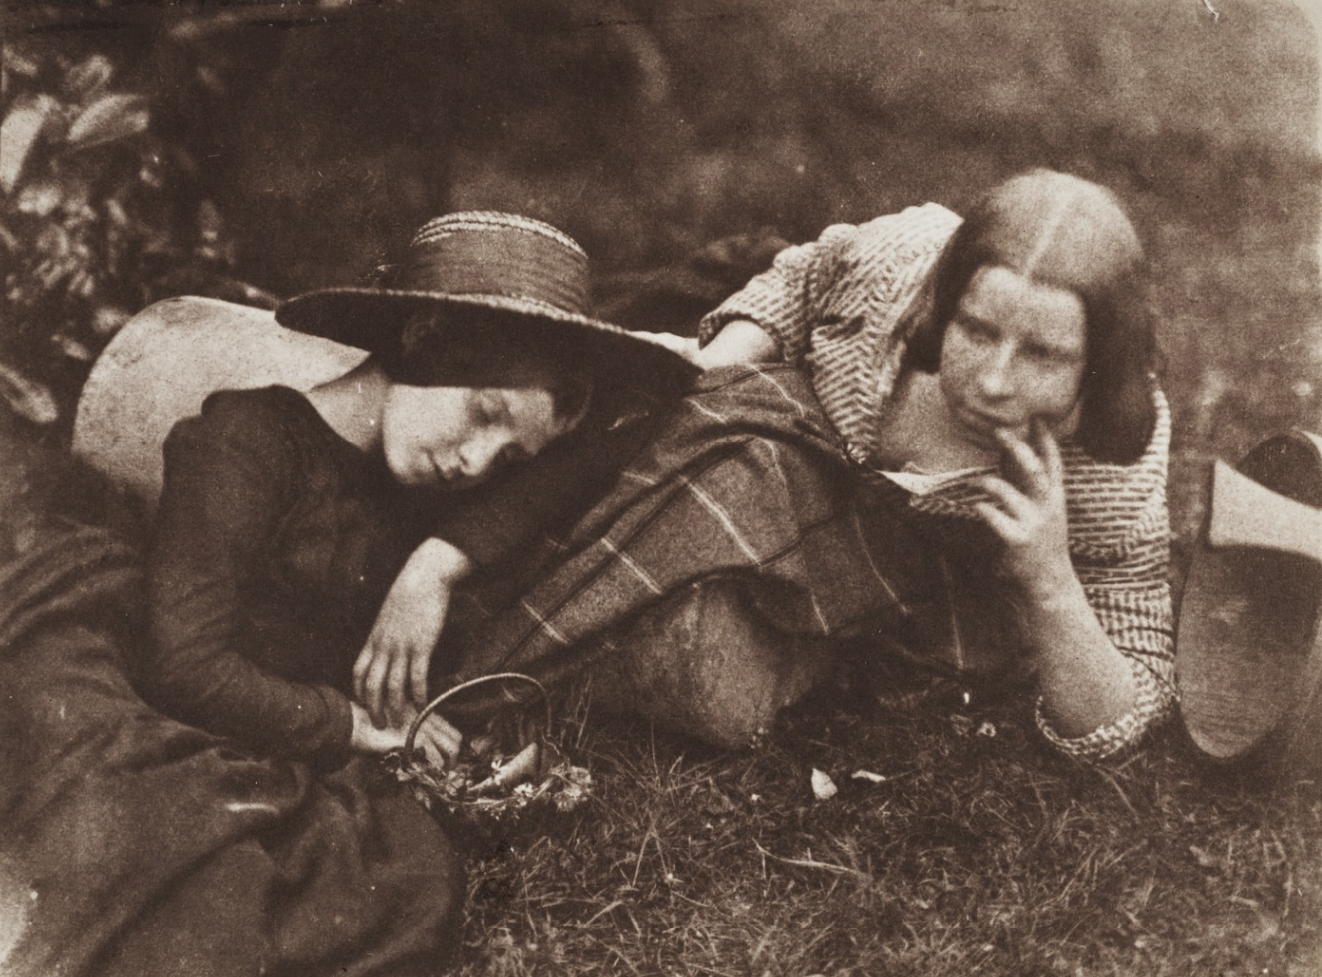 [Image: Two Scottish sisters in their teens or thereabouts, relaxing on an Edinburgh lawn, one in wide-brimmed hat and black dress, the other in tartan skirt and ticked blouse.]